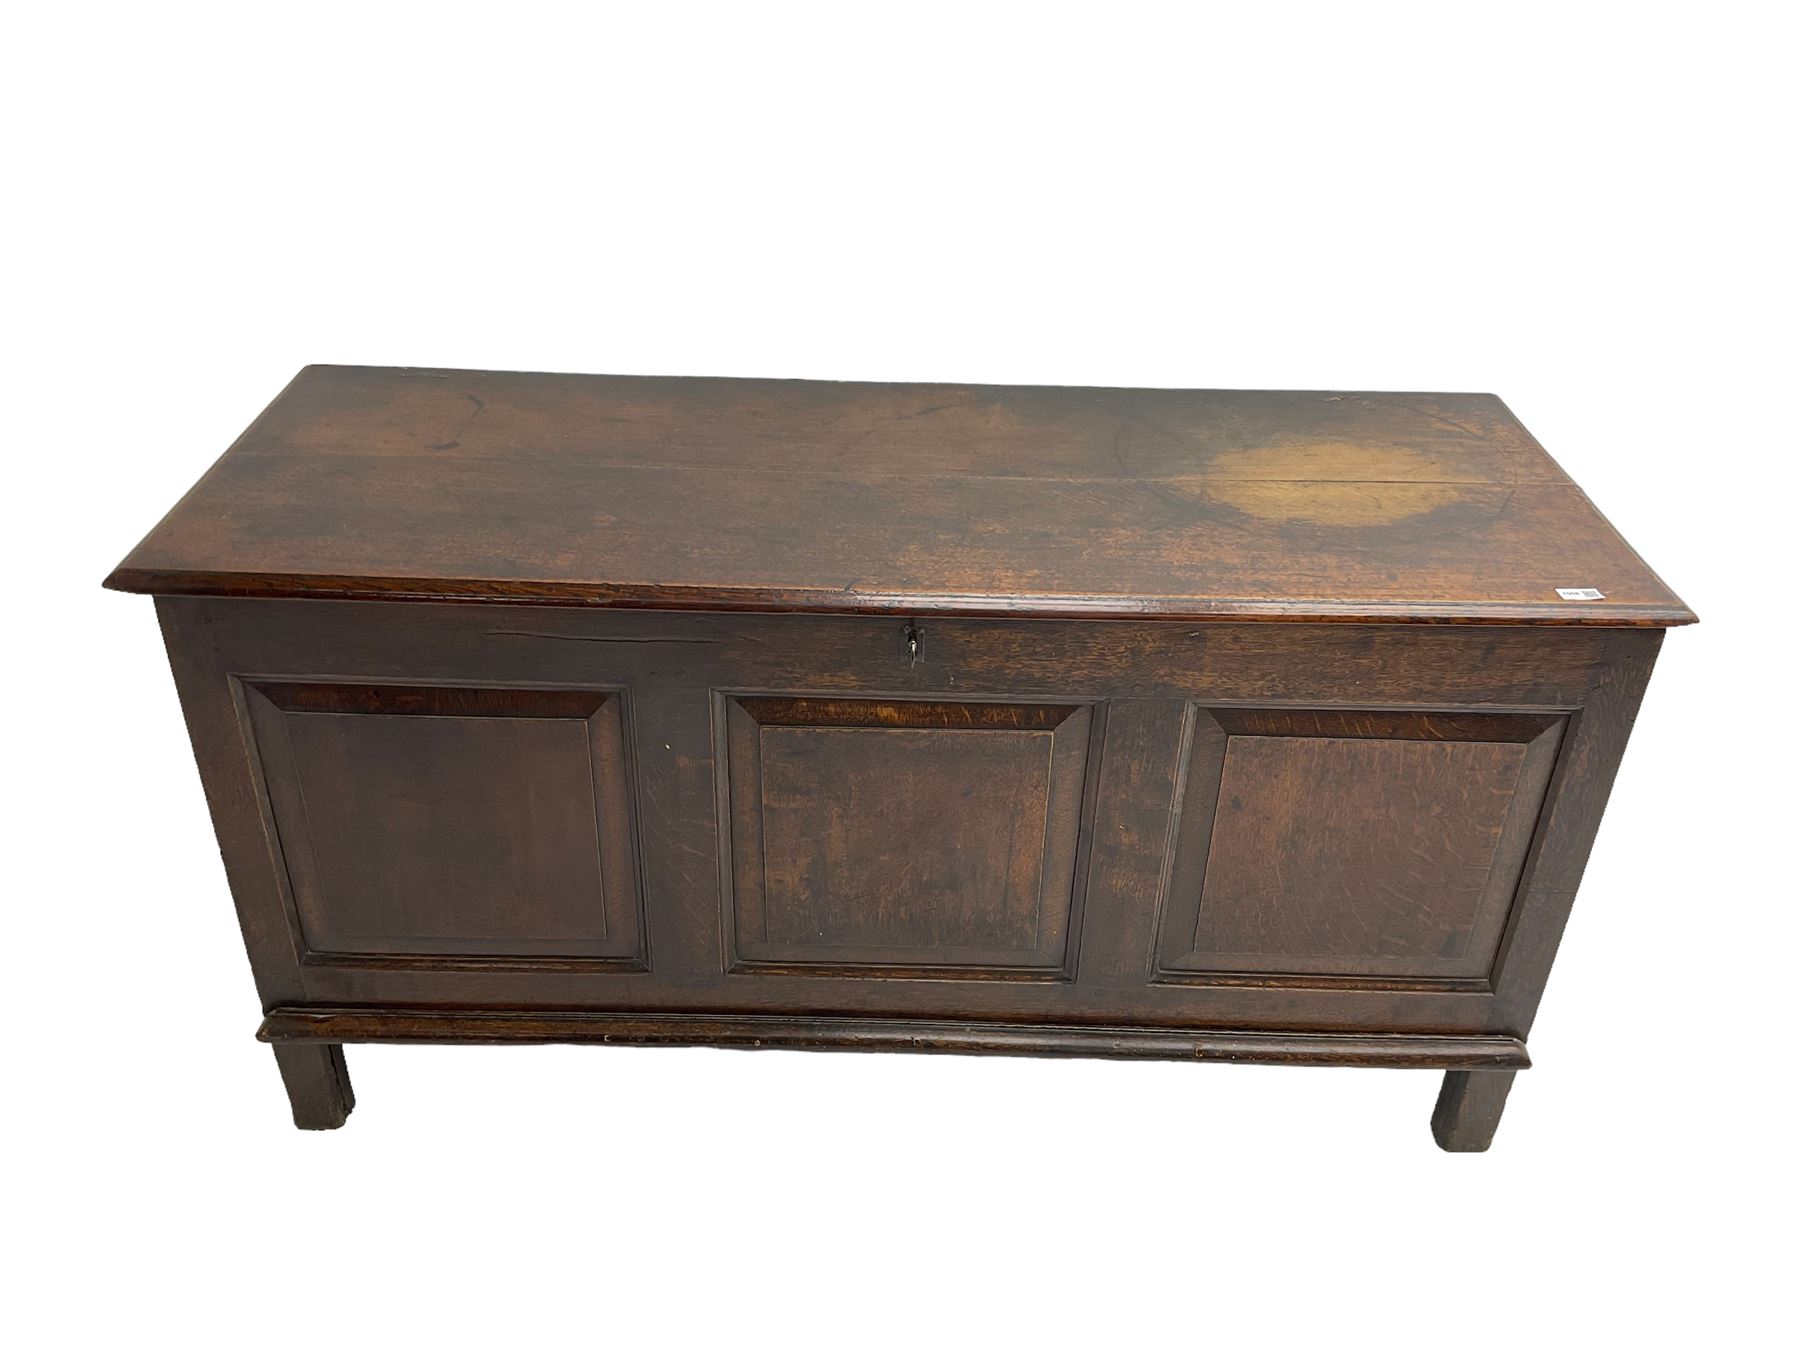 Large 18th to early 19th century oak coffer - Image 2 of 6